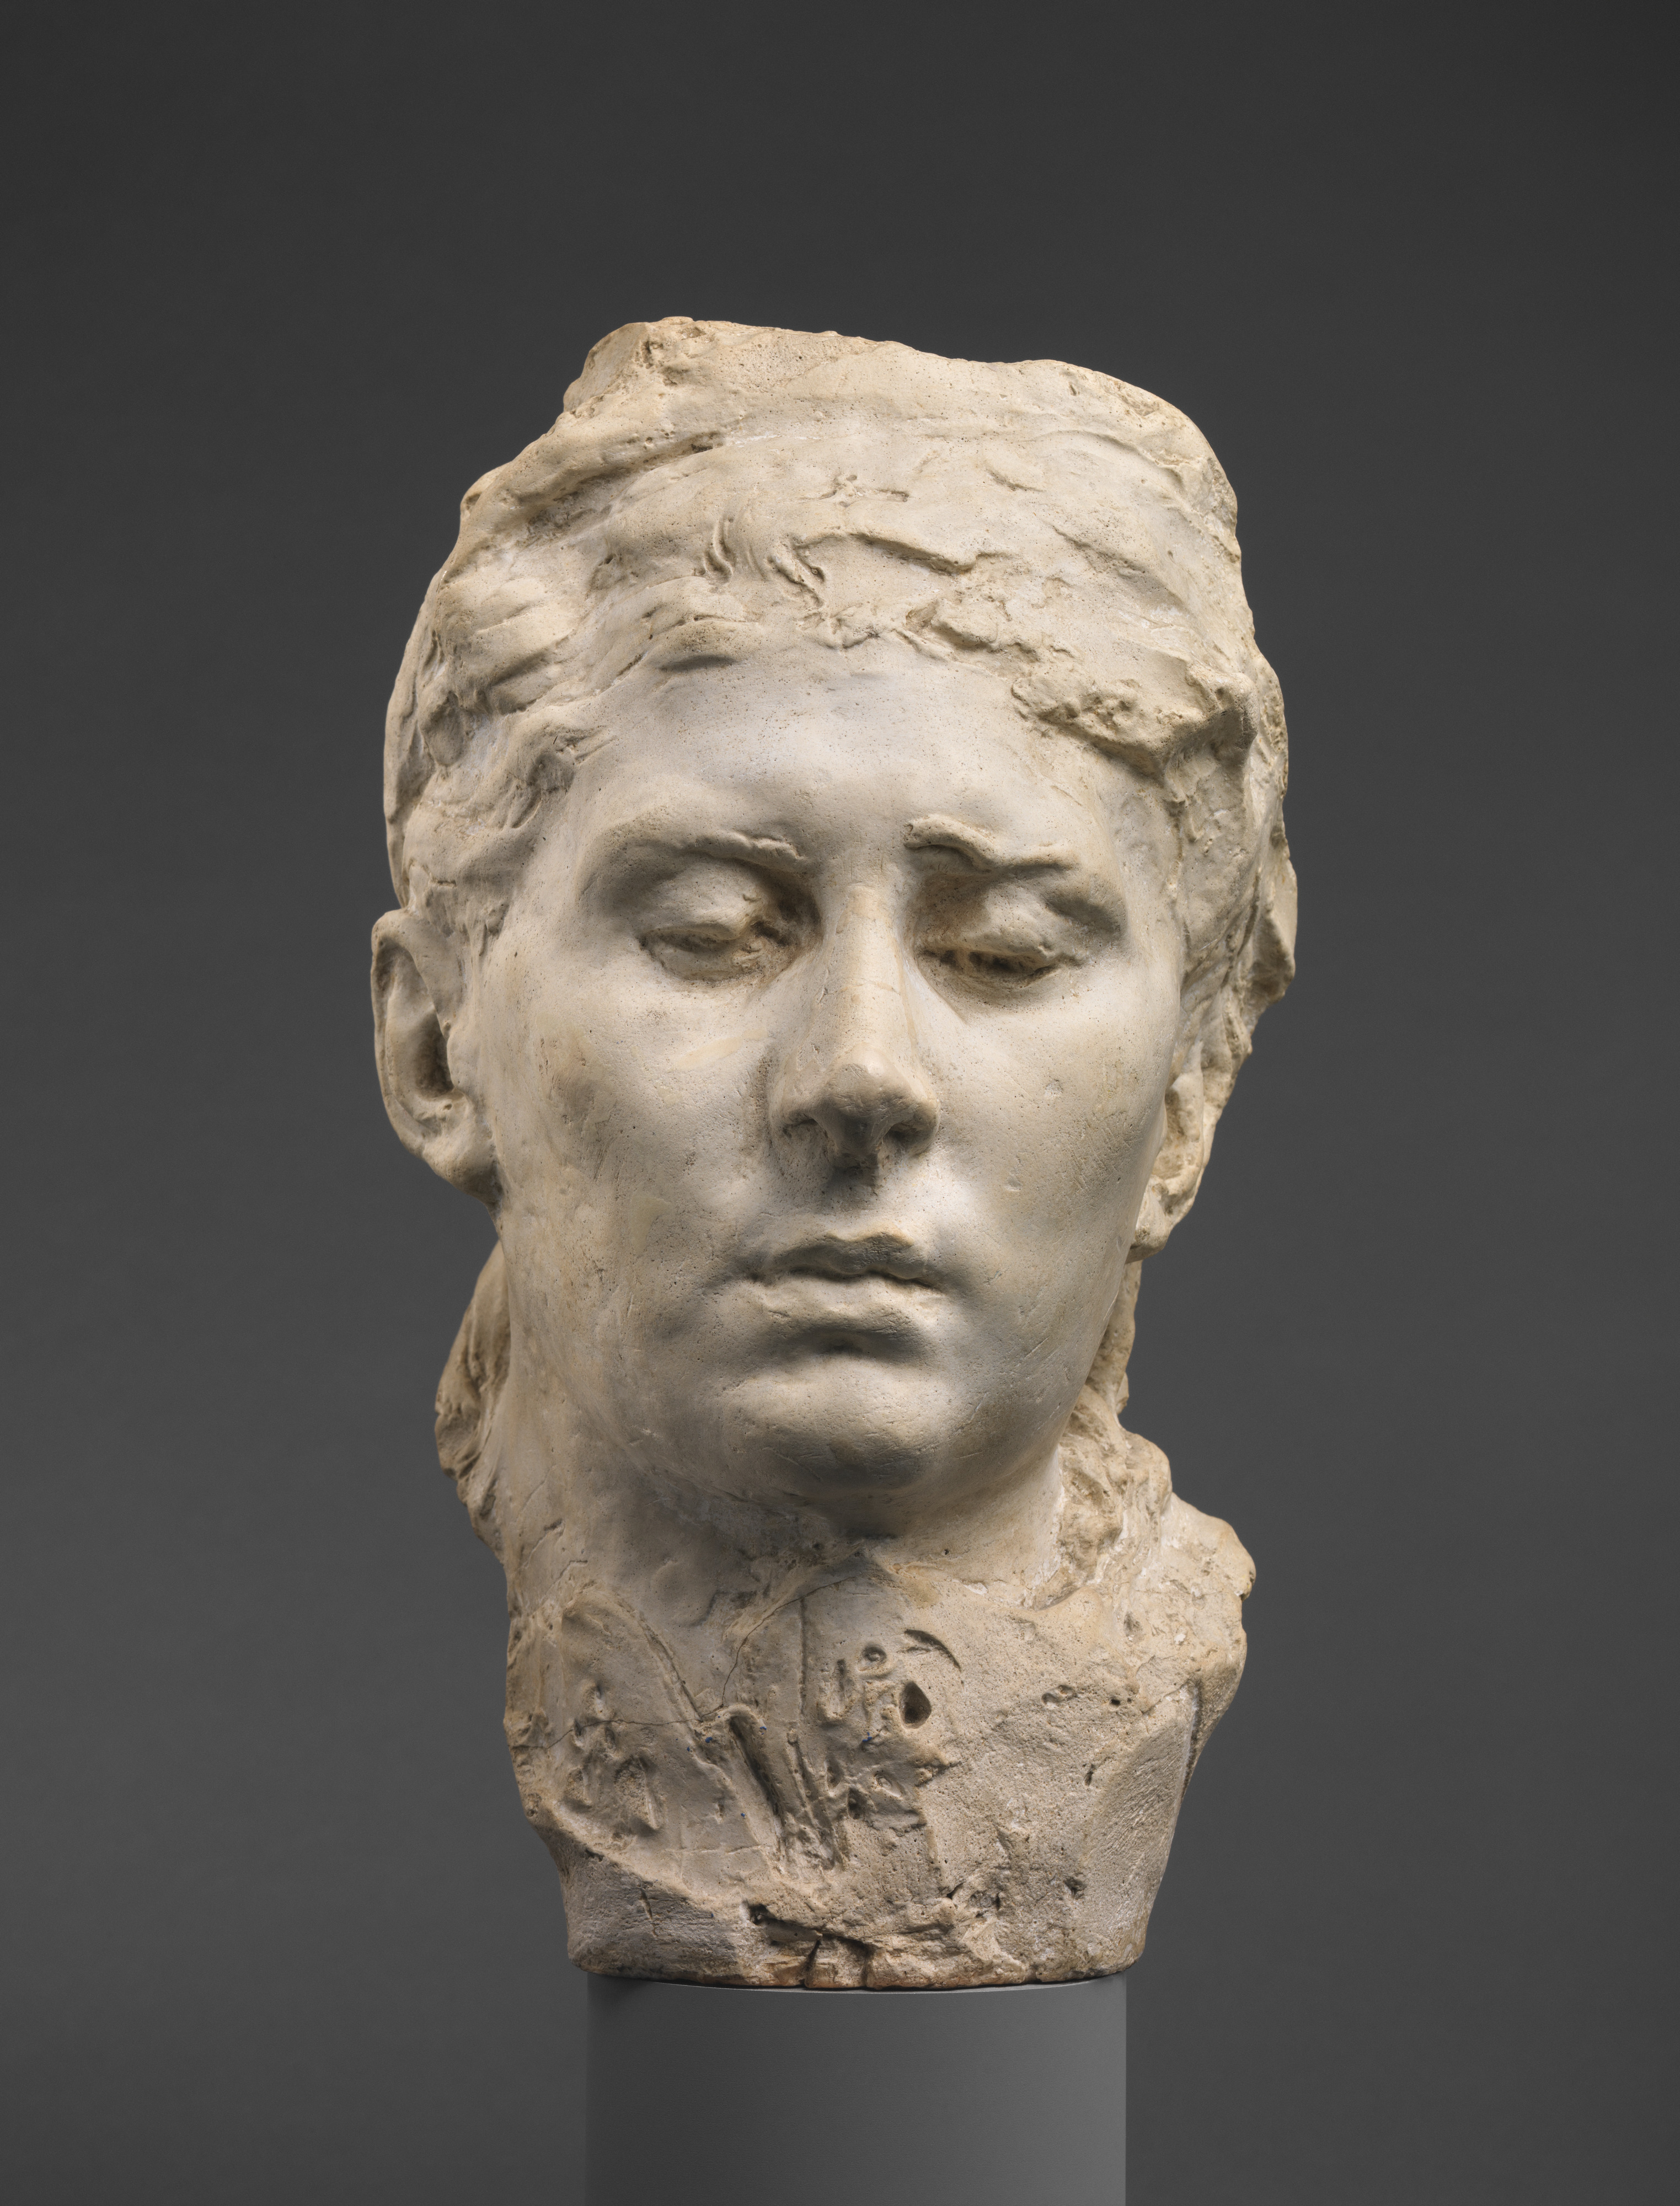 Auguste Rodin | Mask of Rose Beuret | French | The Met3046 x 4000